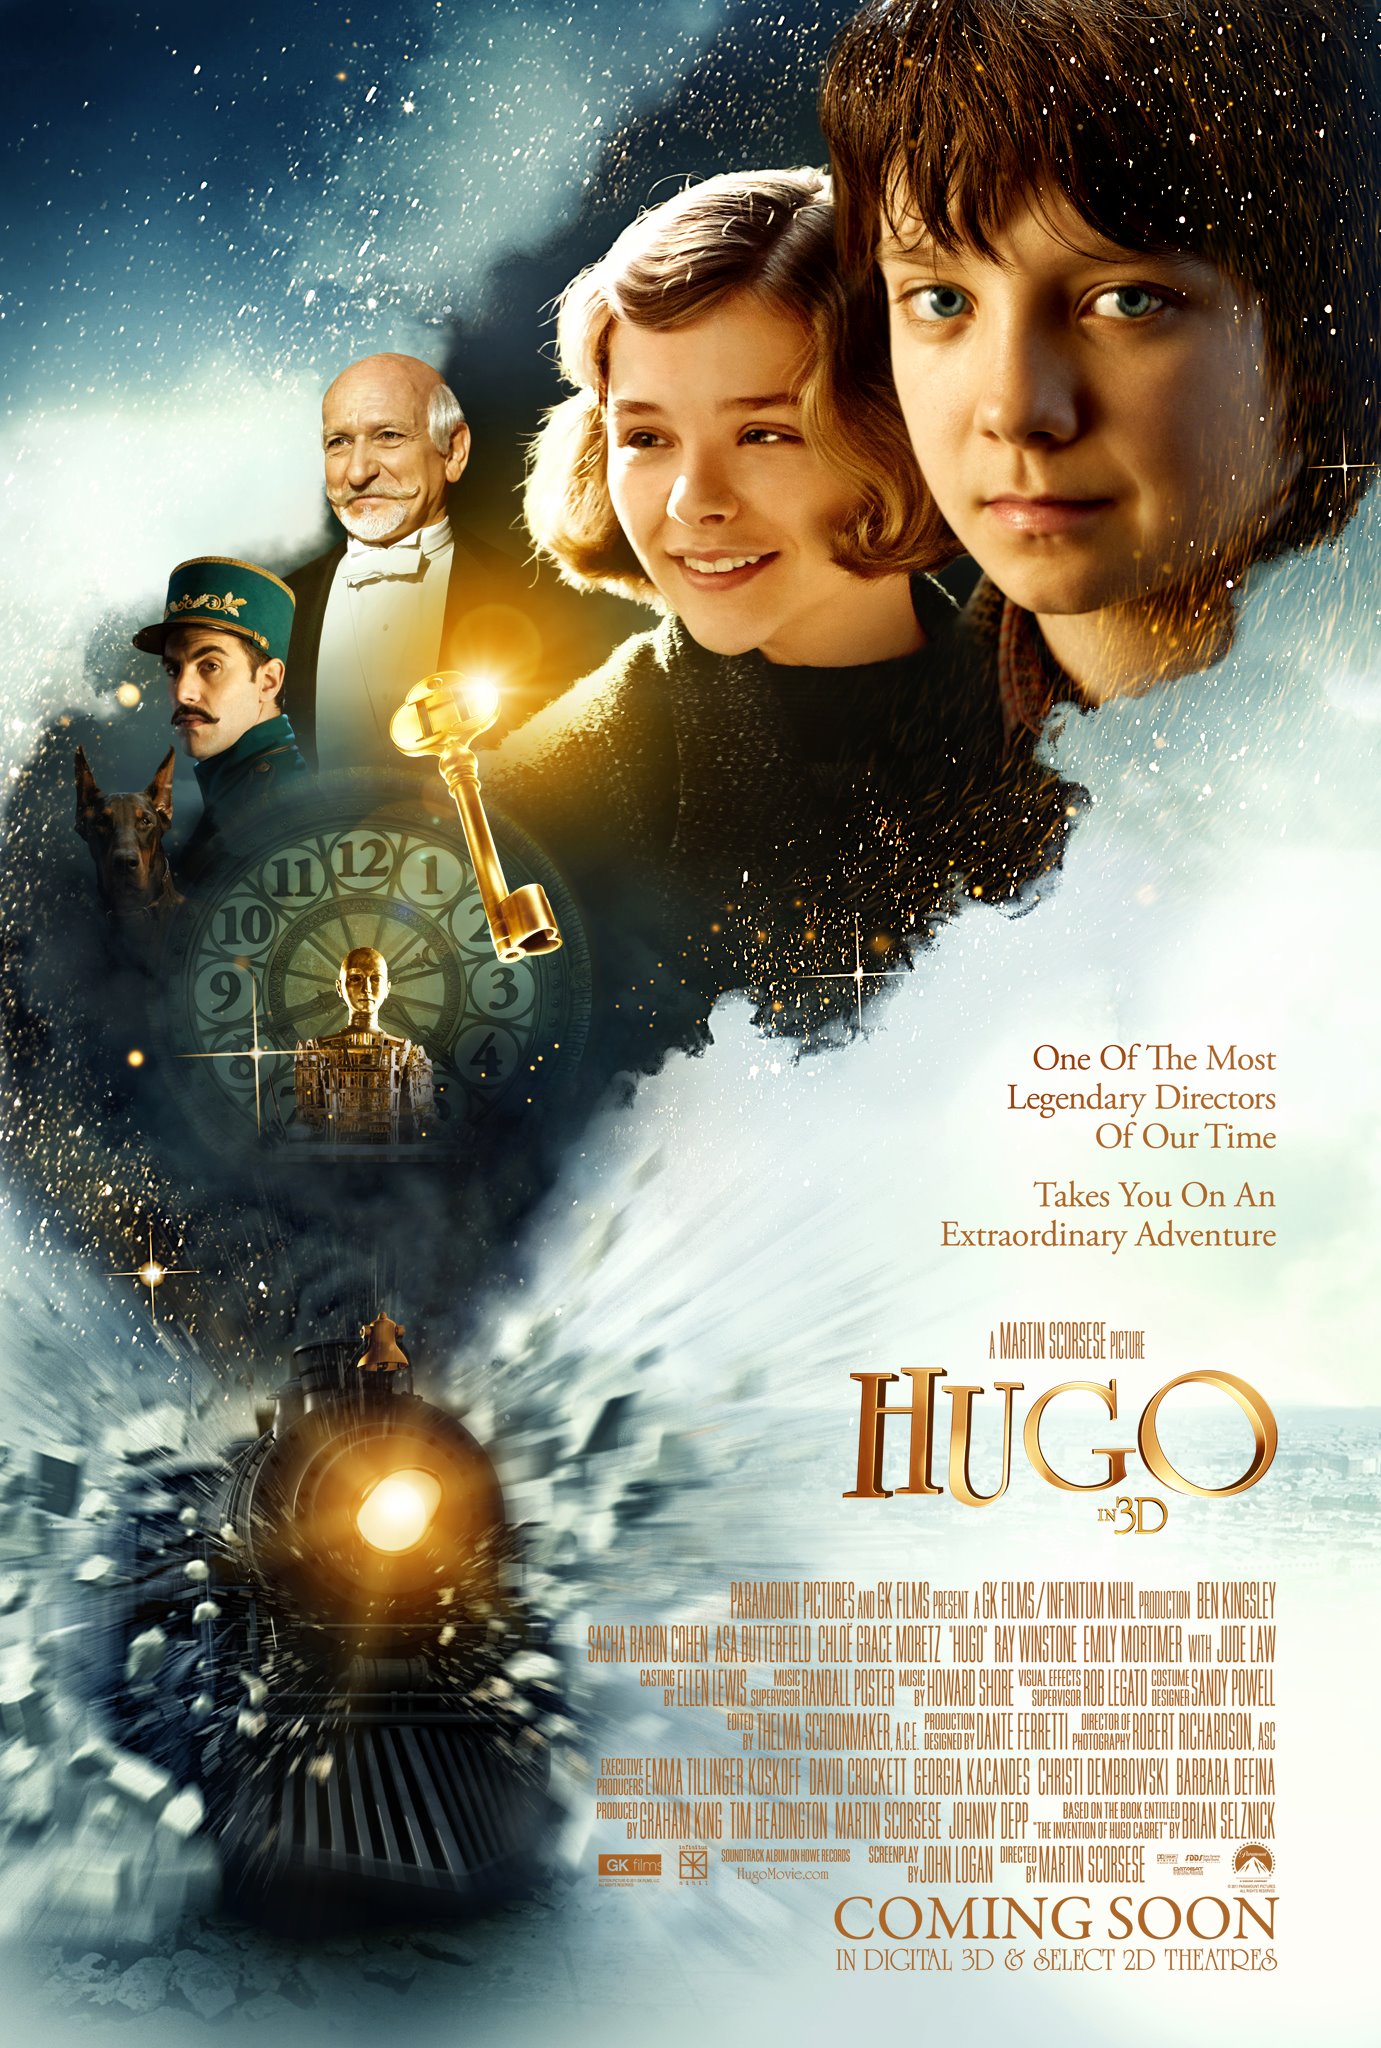 Watch an interview with Martin Scorsese on Hugo – The Reel Bits